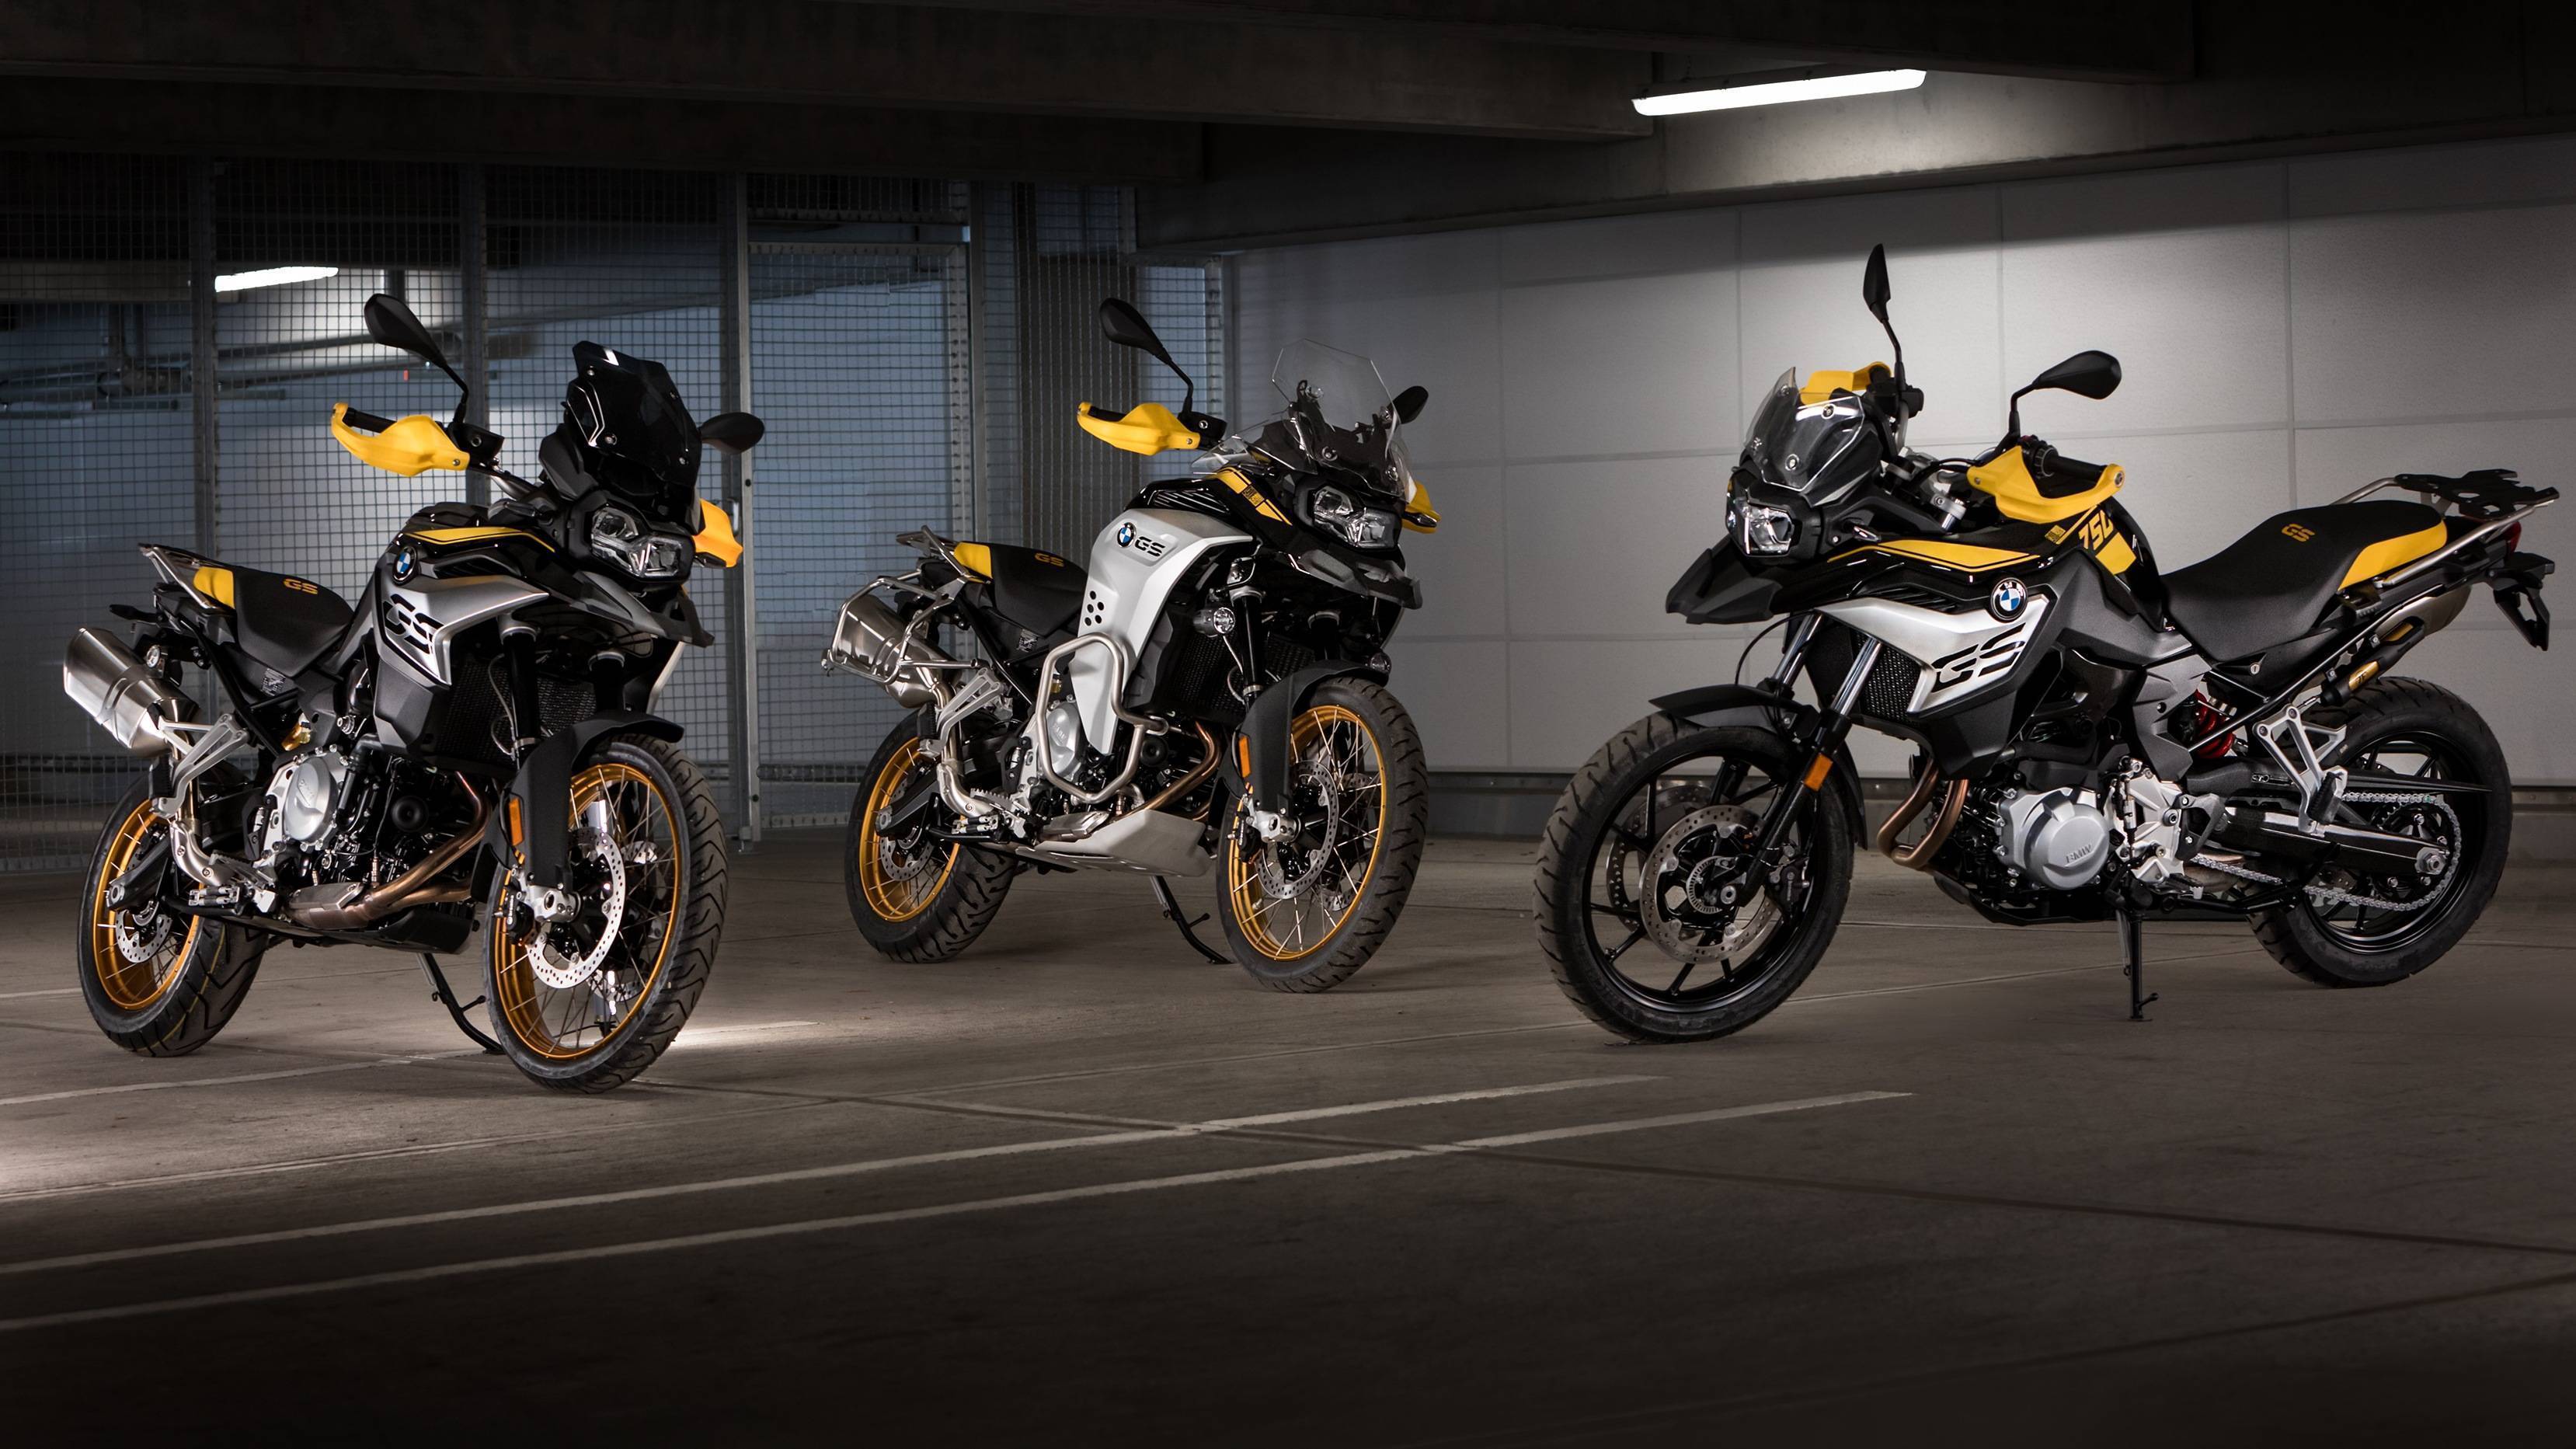 BMW F 750 GS, F 850 GS and F 850 GS Adventure gets new range of